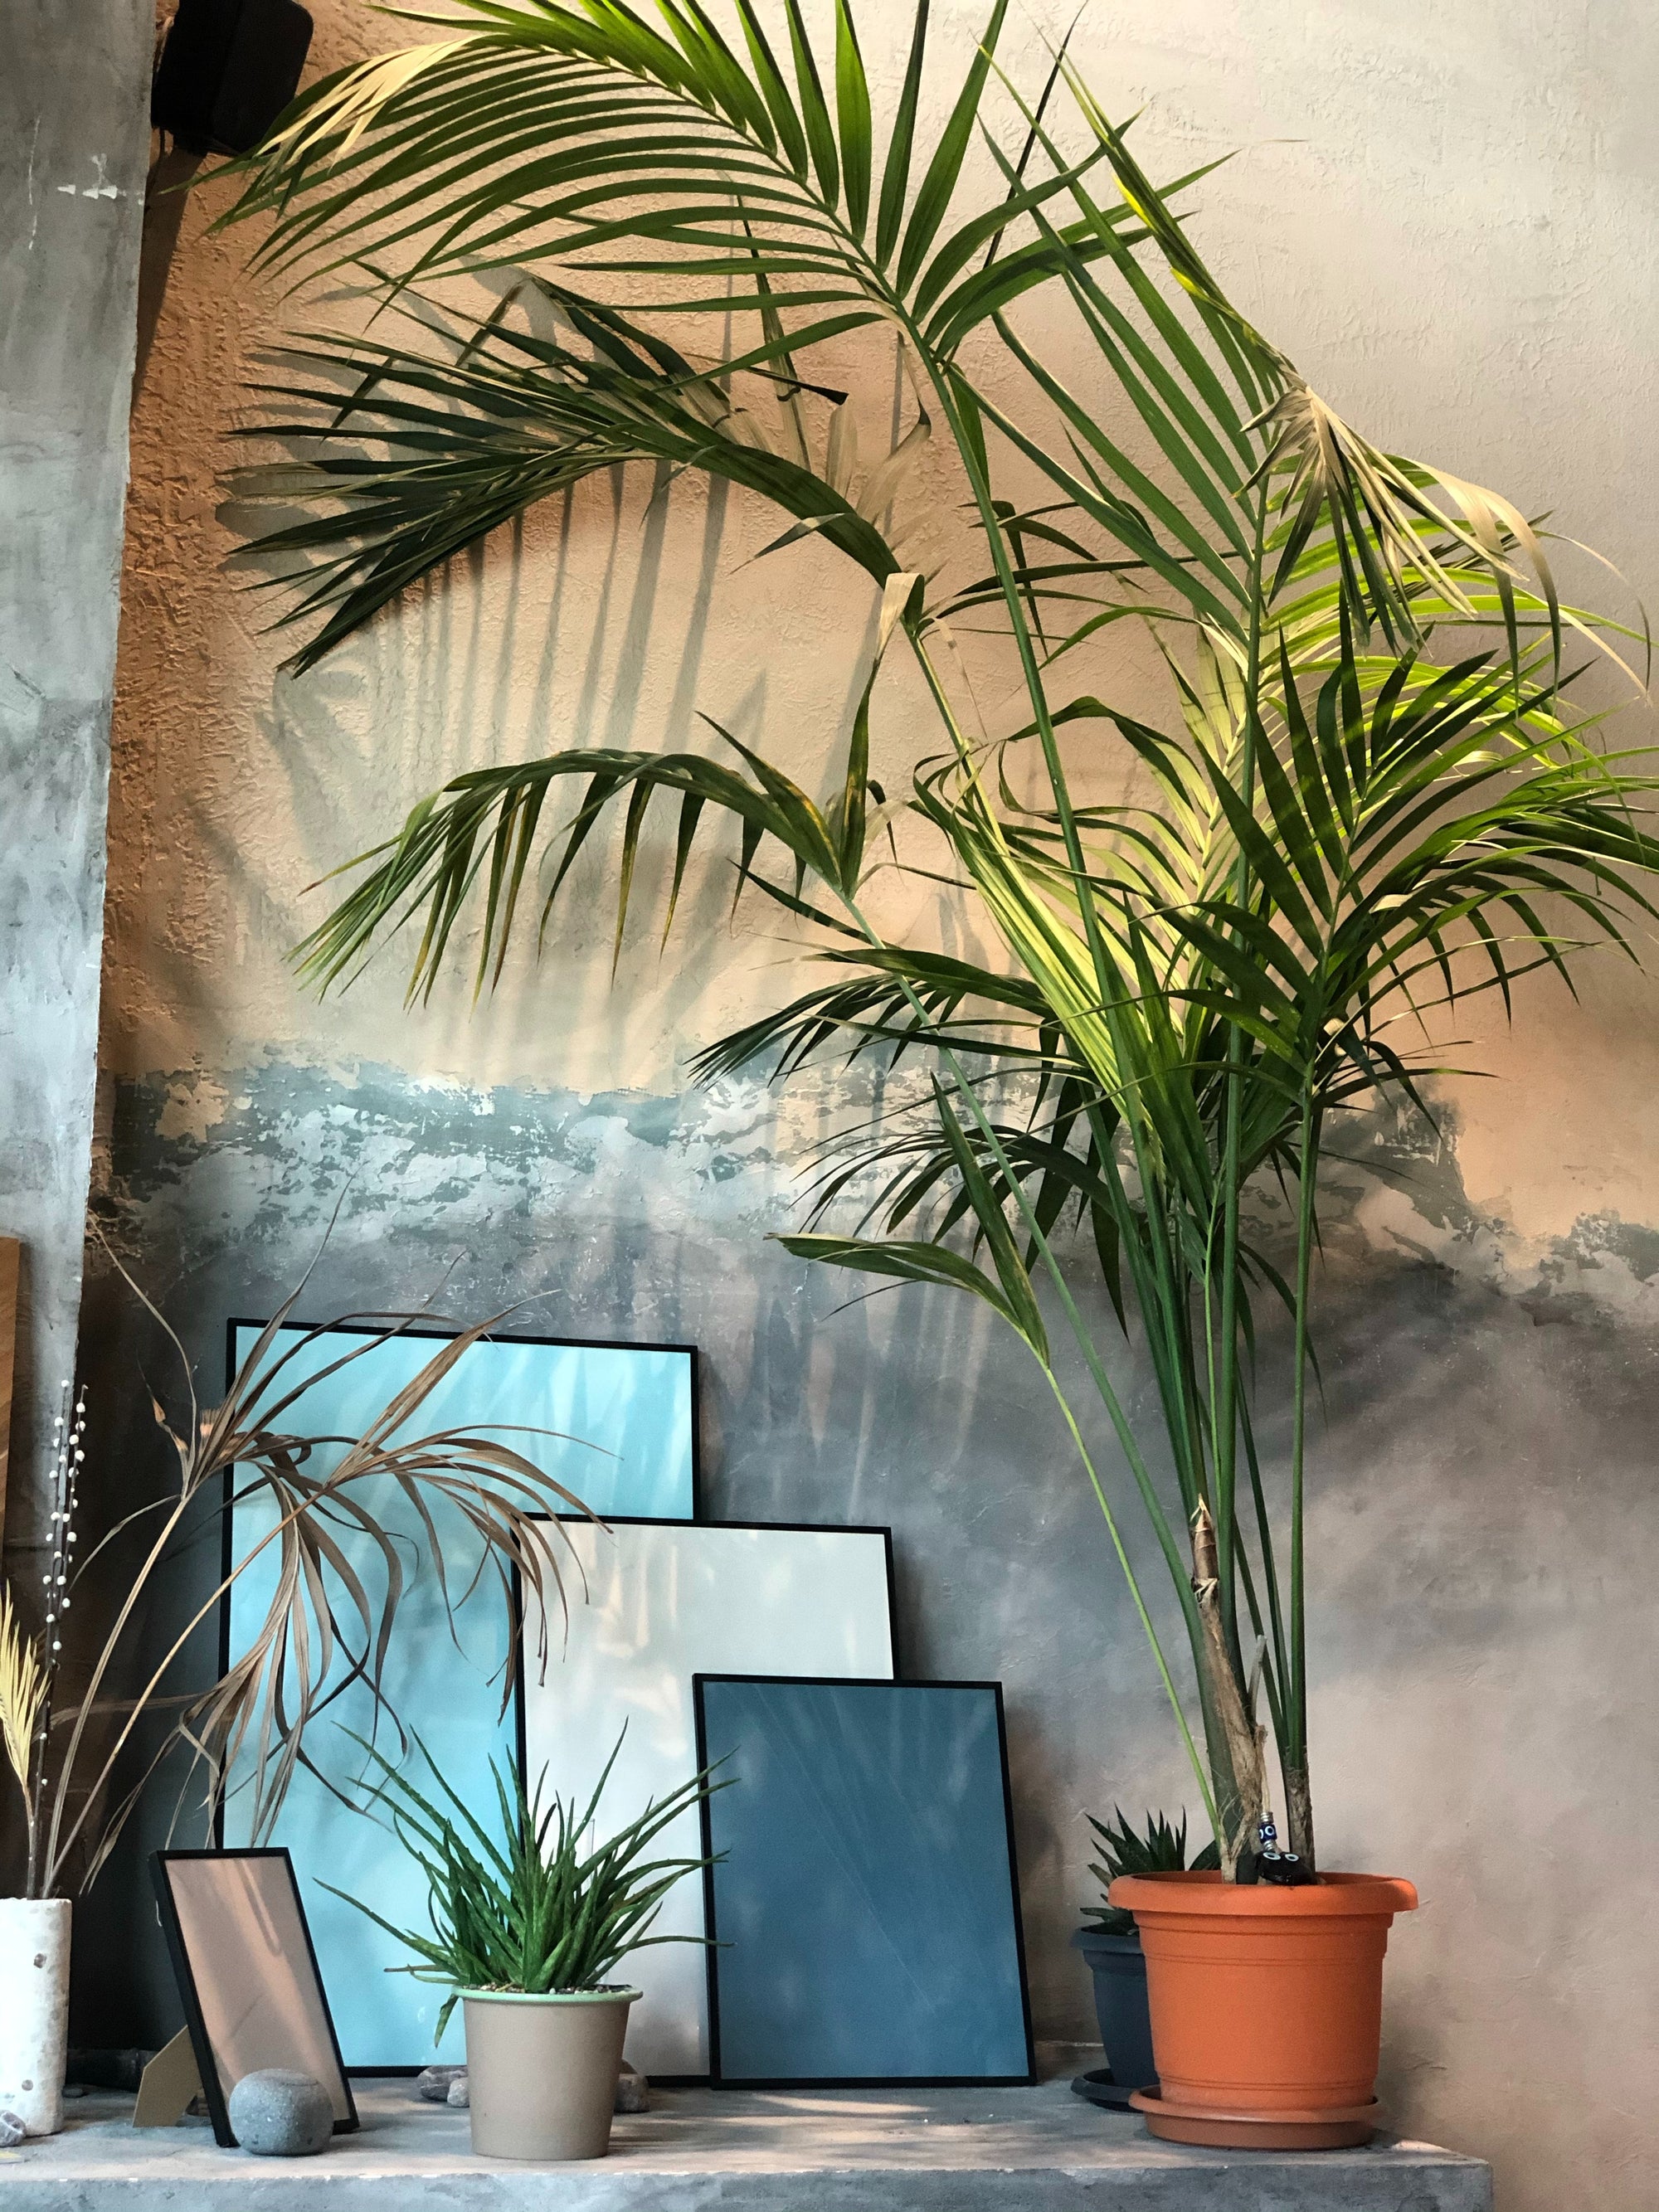 10 Tall Indoor Plants To Add Drama To Your Space